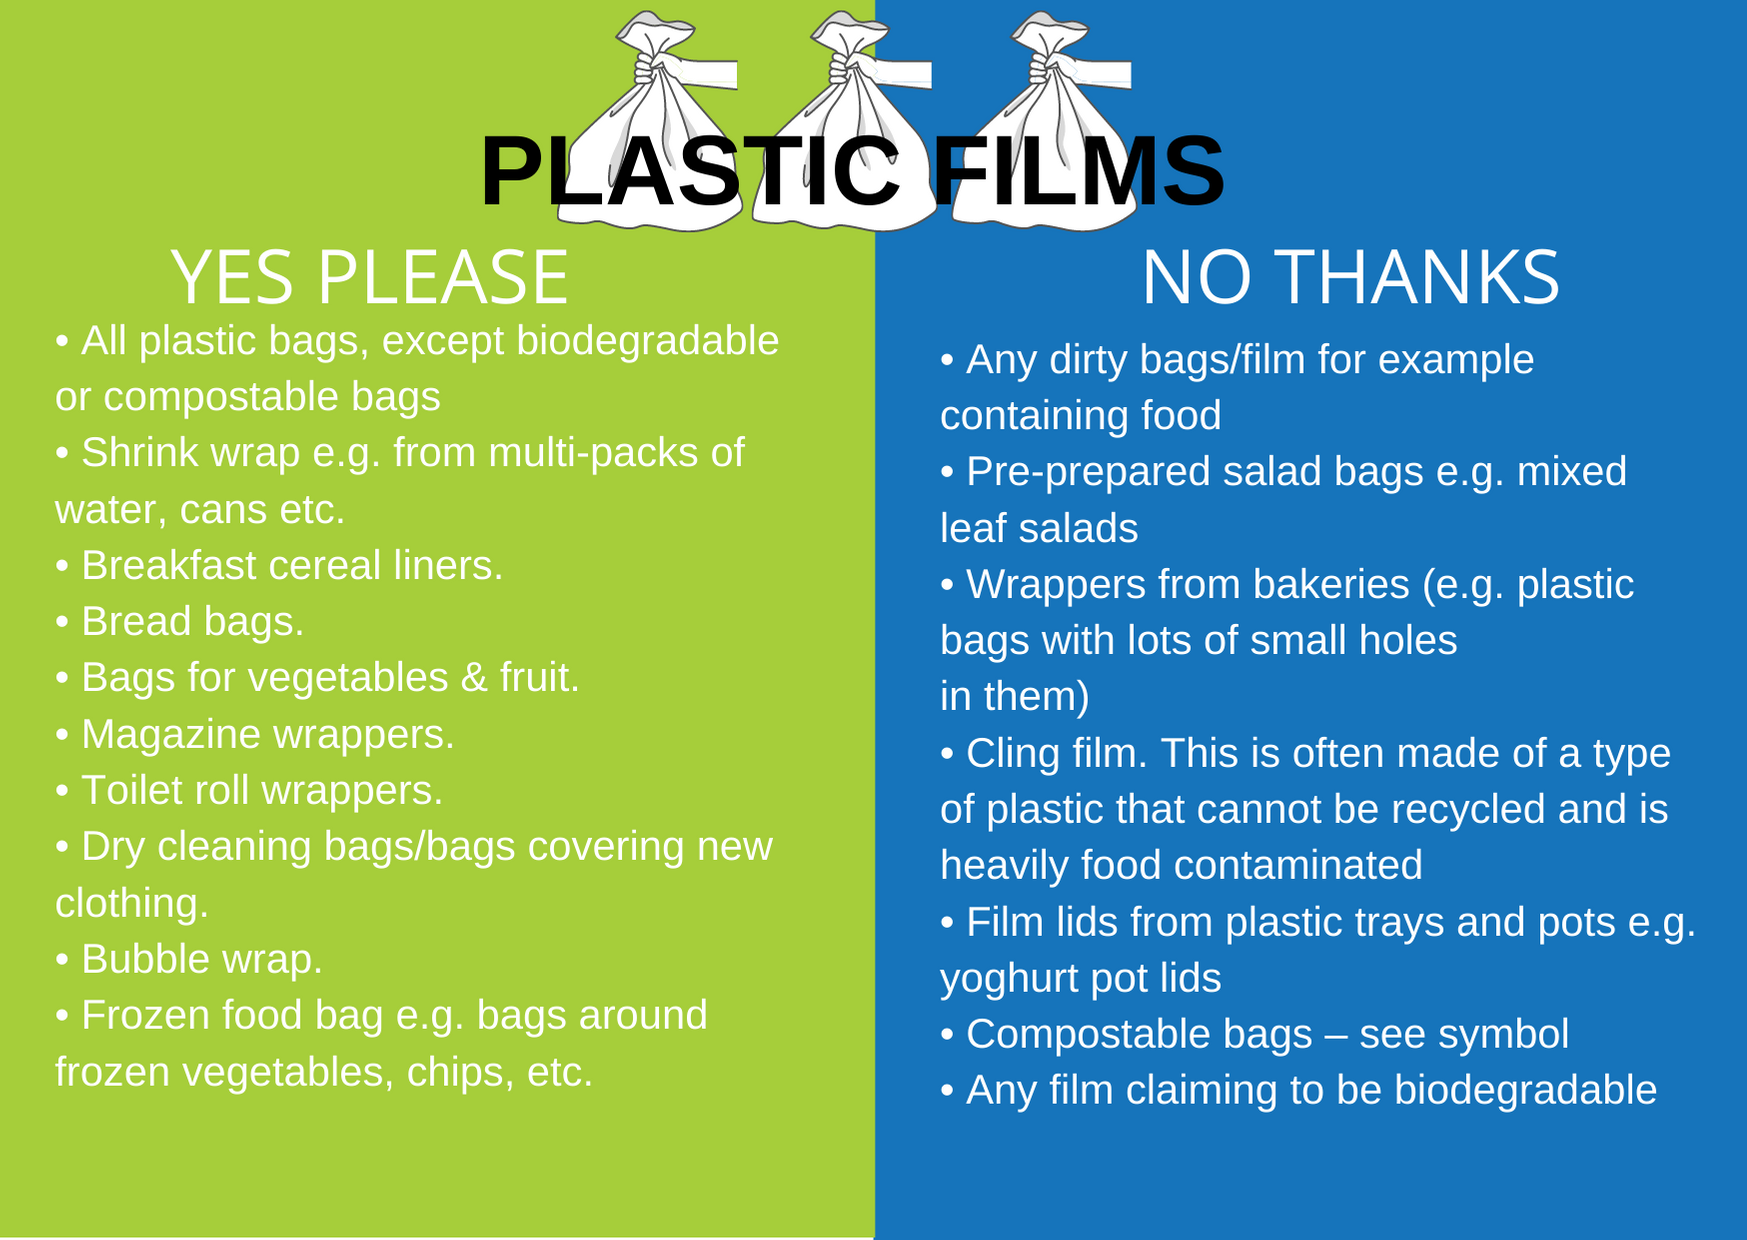 What plastic films can i recycle